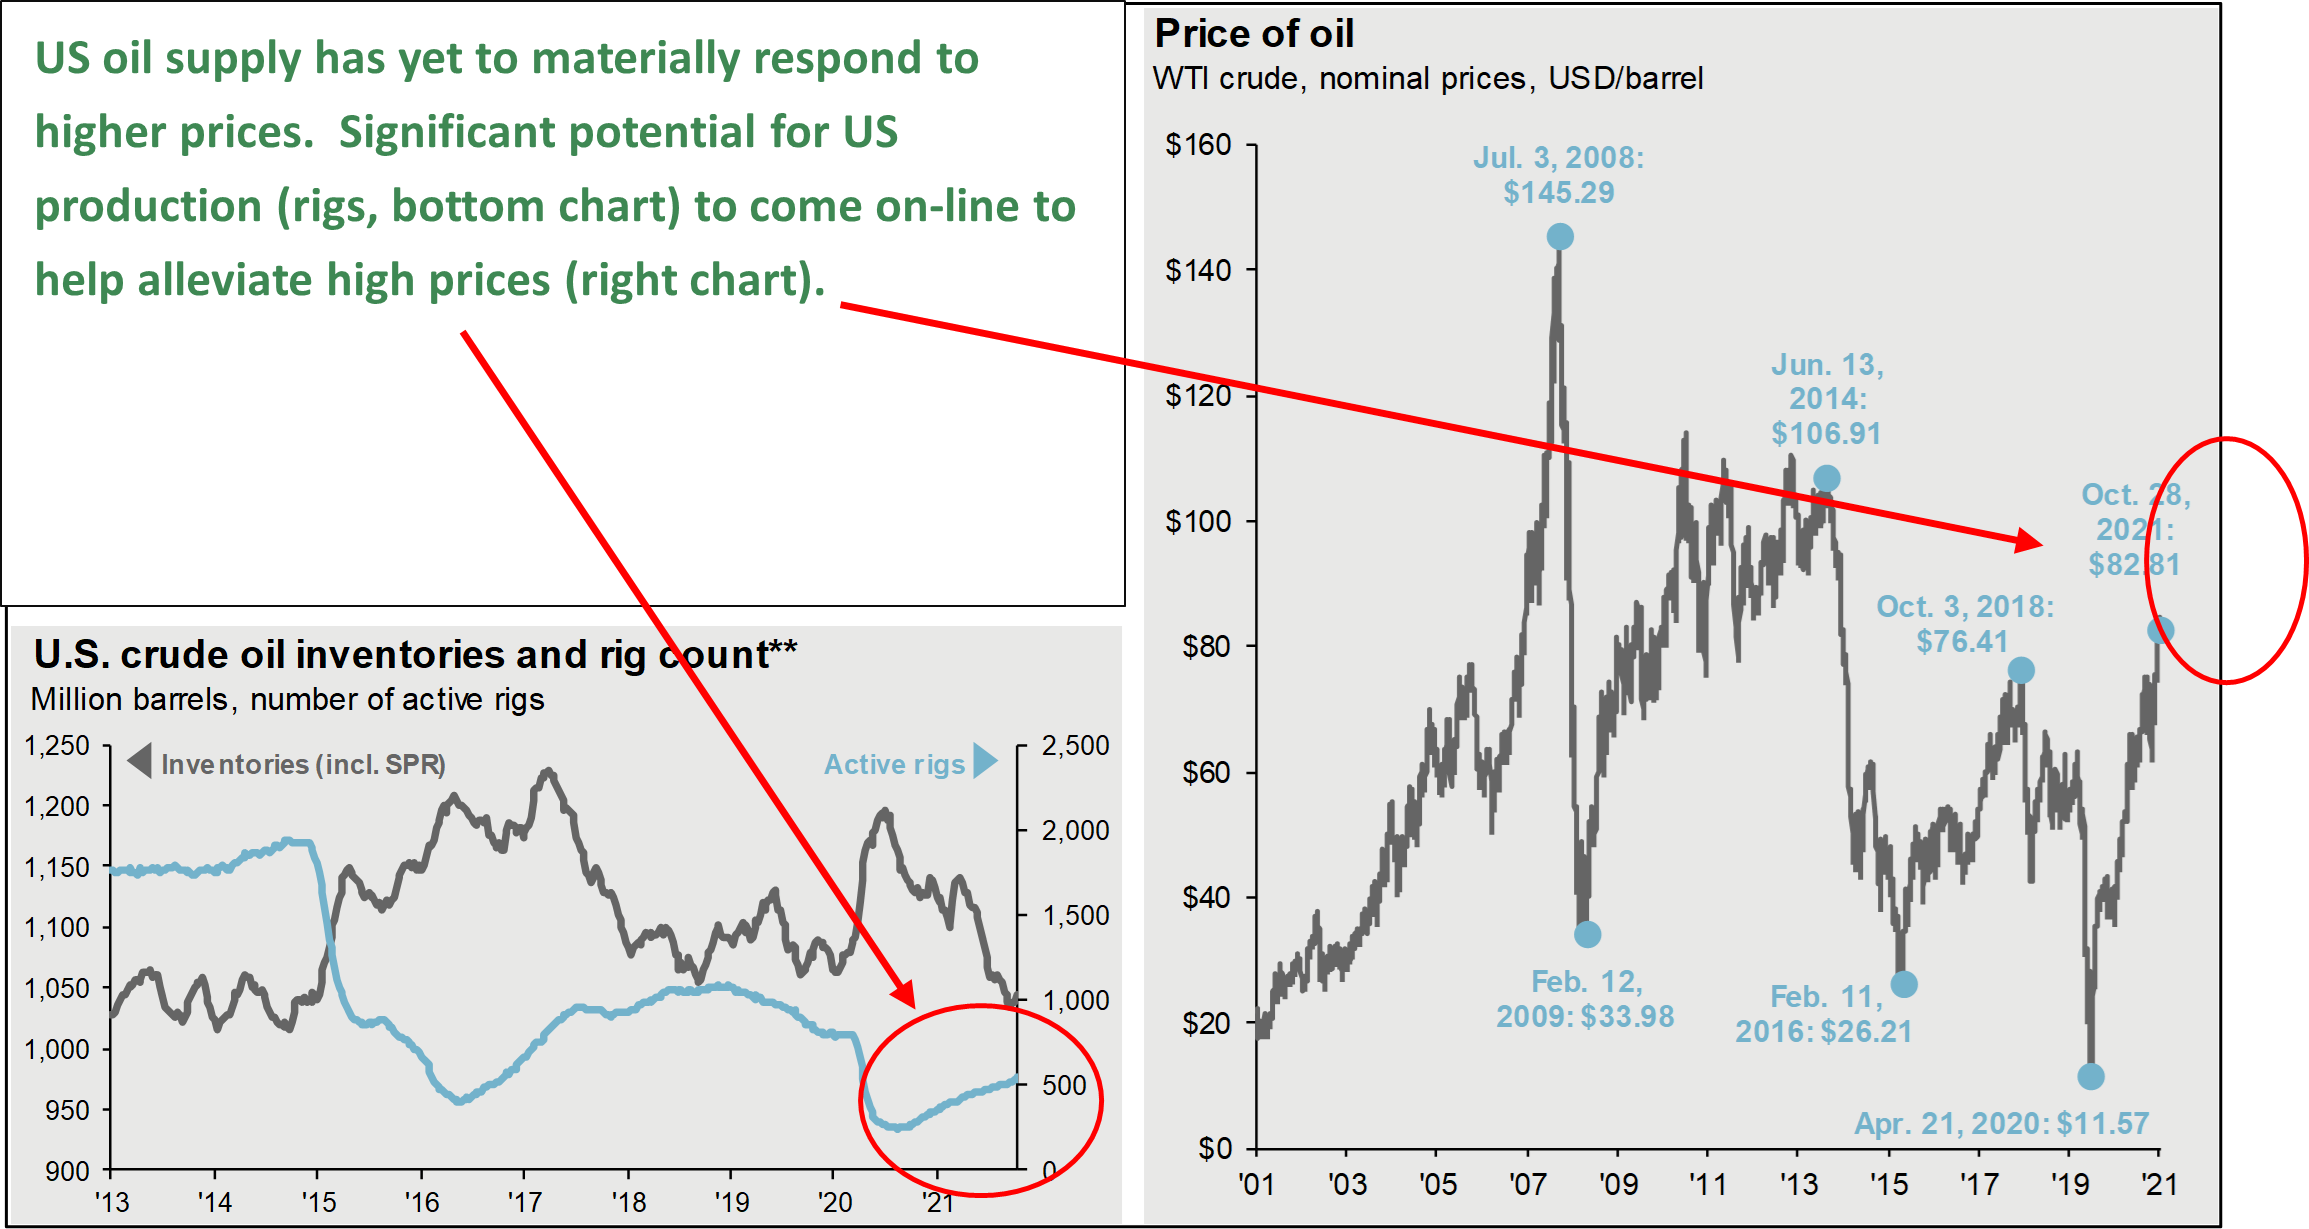 Line graphs depicting US crude oil inventories and rig count from 2013 to 2021 and Price of oil from 2001 to 2021 with text that reads: US oil supply has yet to materially respond to higher prices. Significant potential for US production (rigs, bottom chart) to come on-line to help alleviate high prices (right chart).